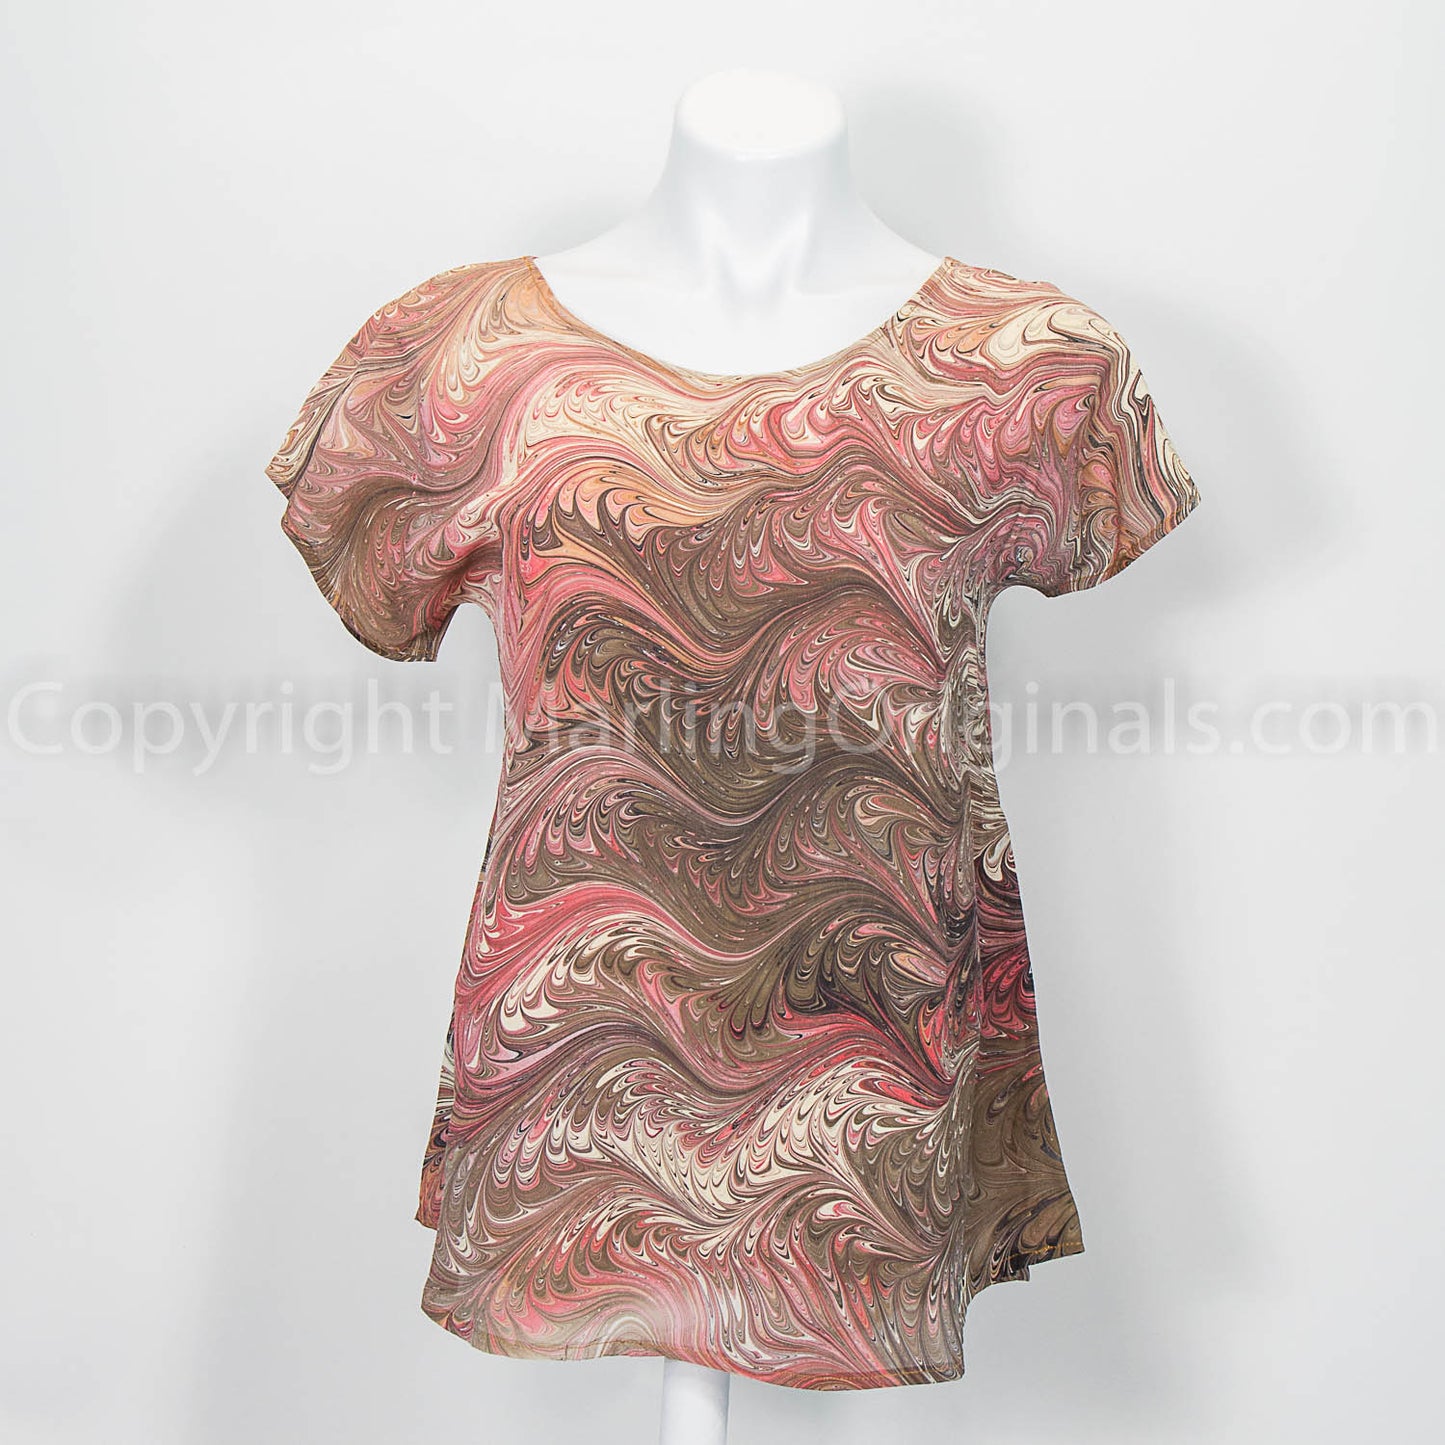 silk top marbled in salmon, brown, cream and brown.  Short sleeve with round neck